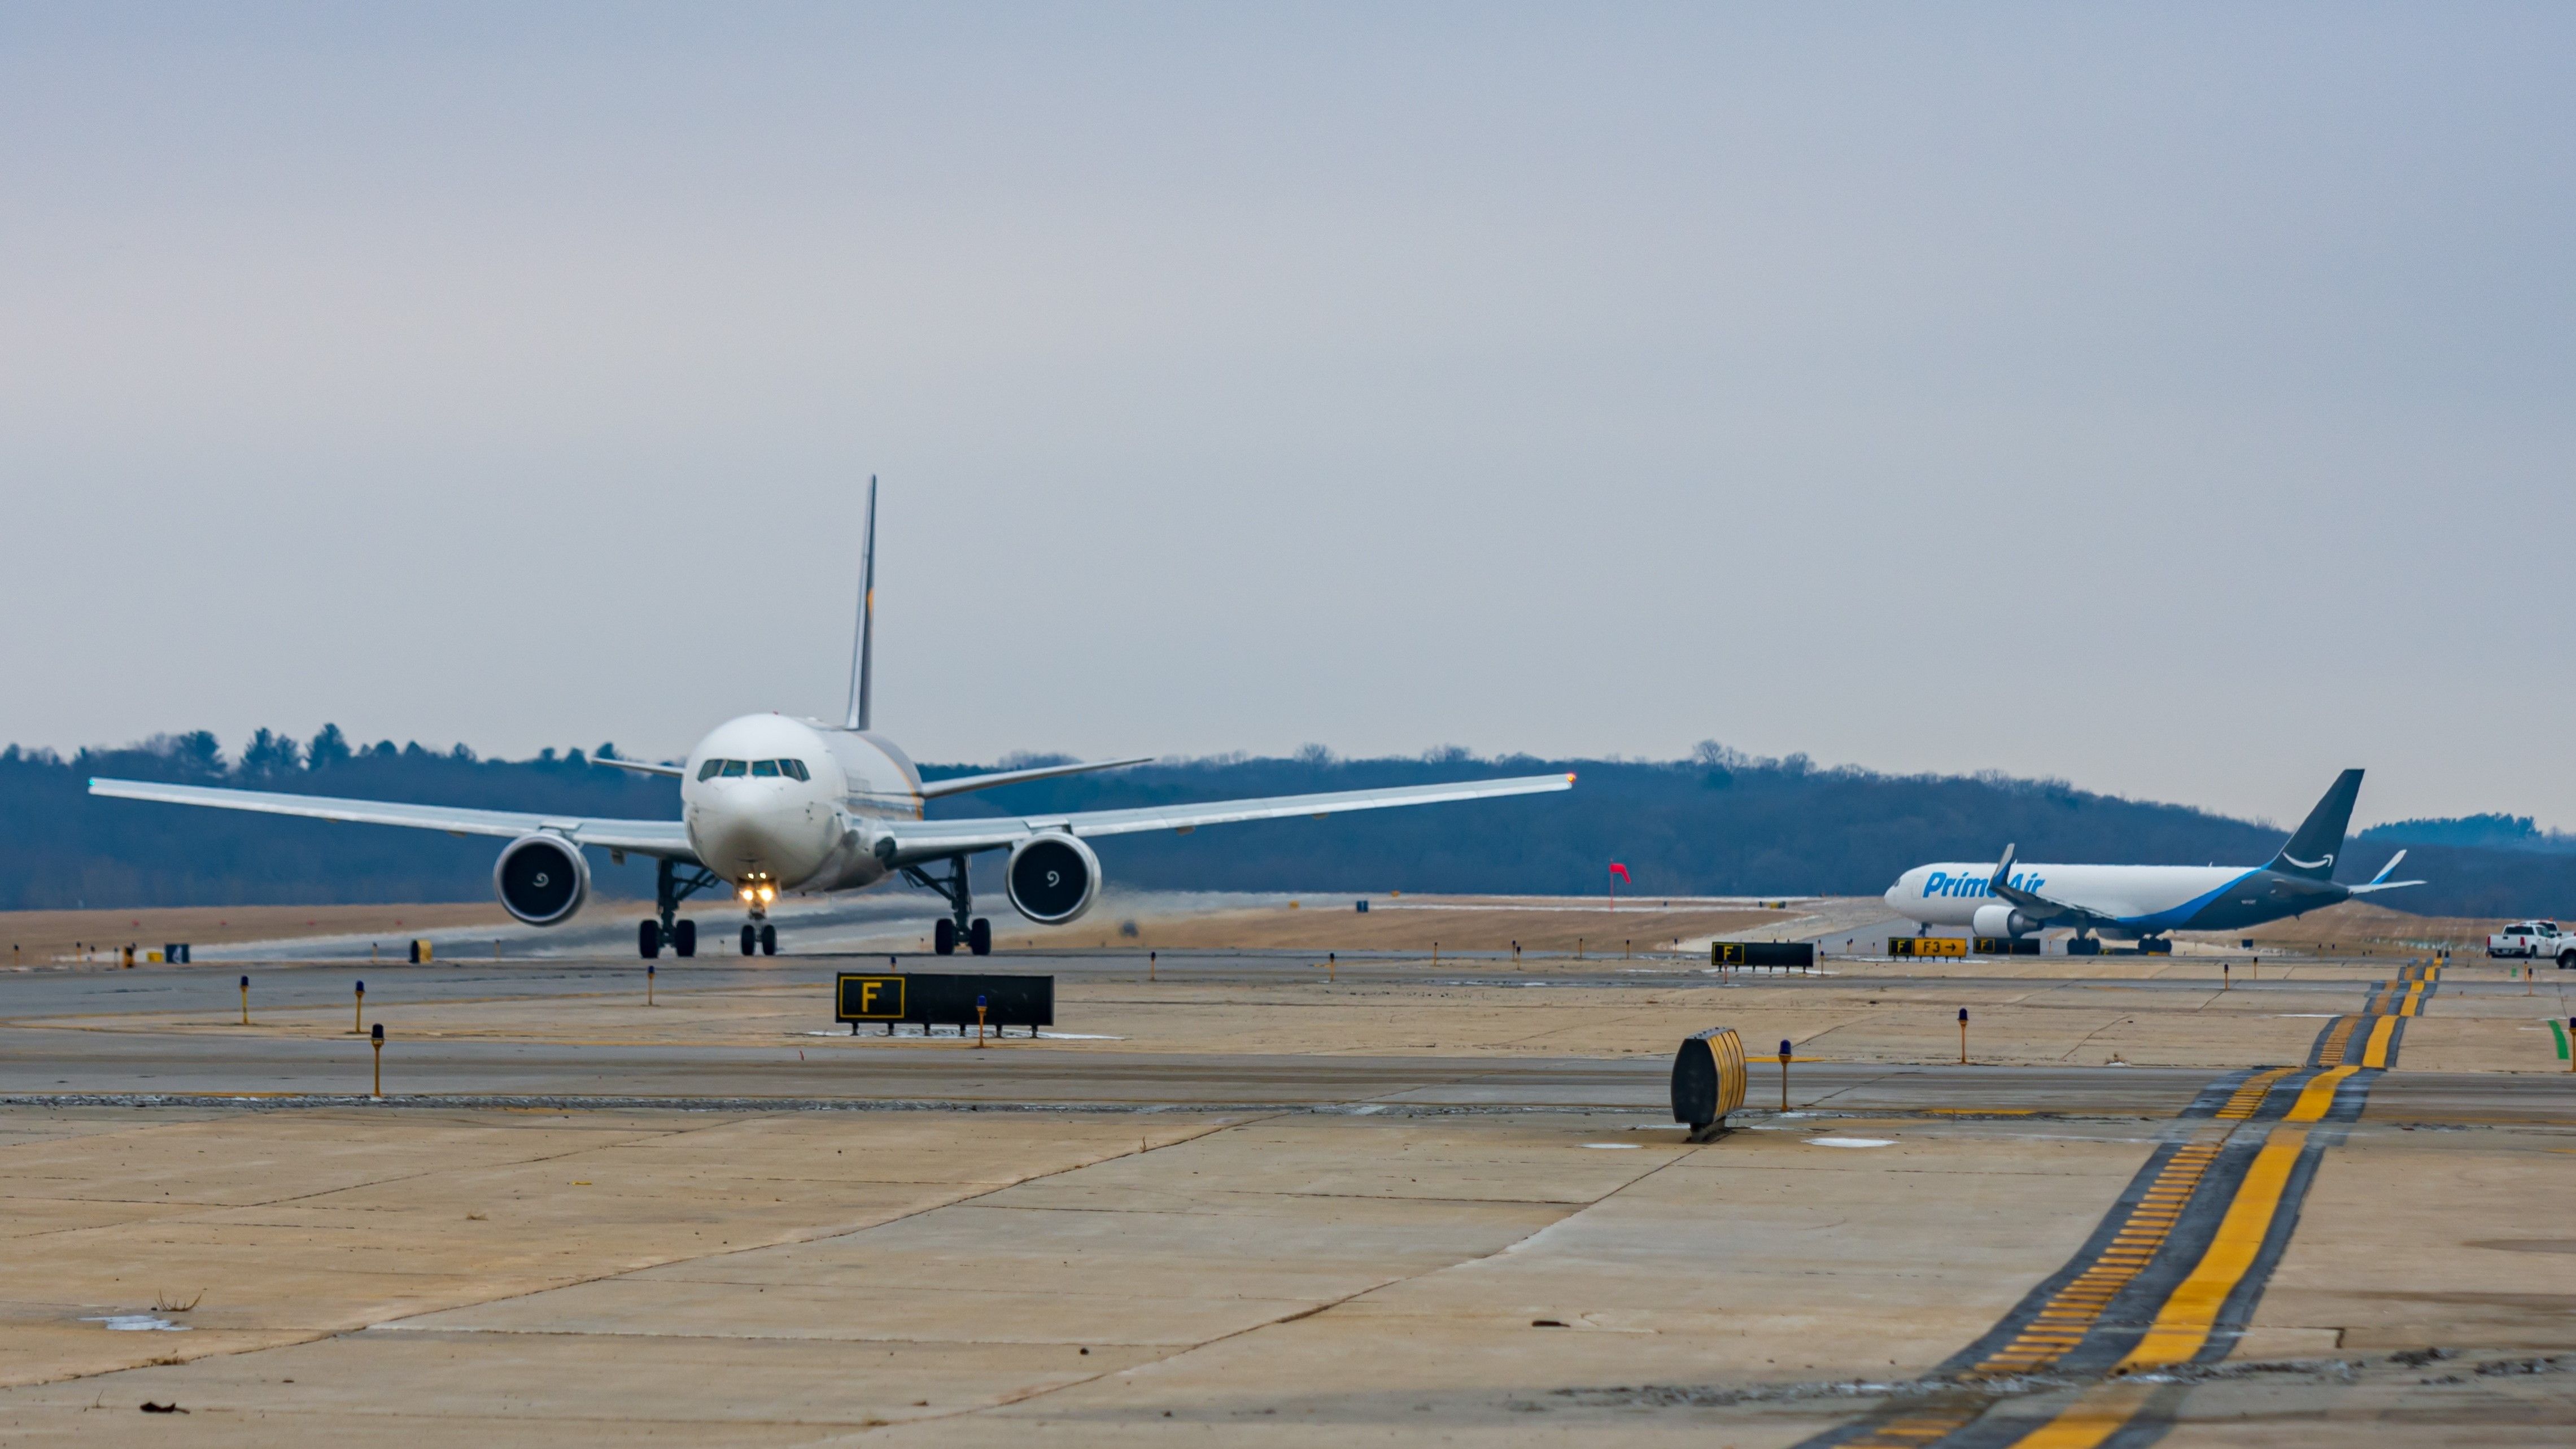 UPS & Amazon Prime Air Boeing 767s on the apron At Chicago Rockford Airport.